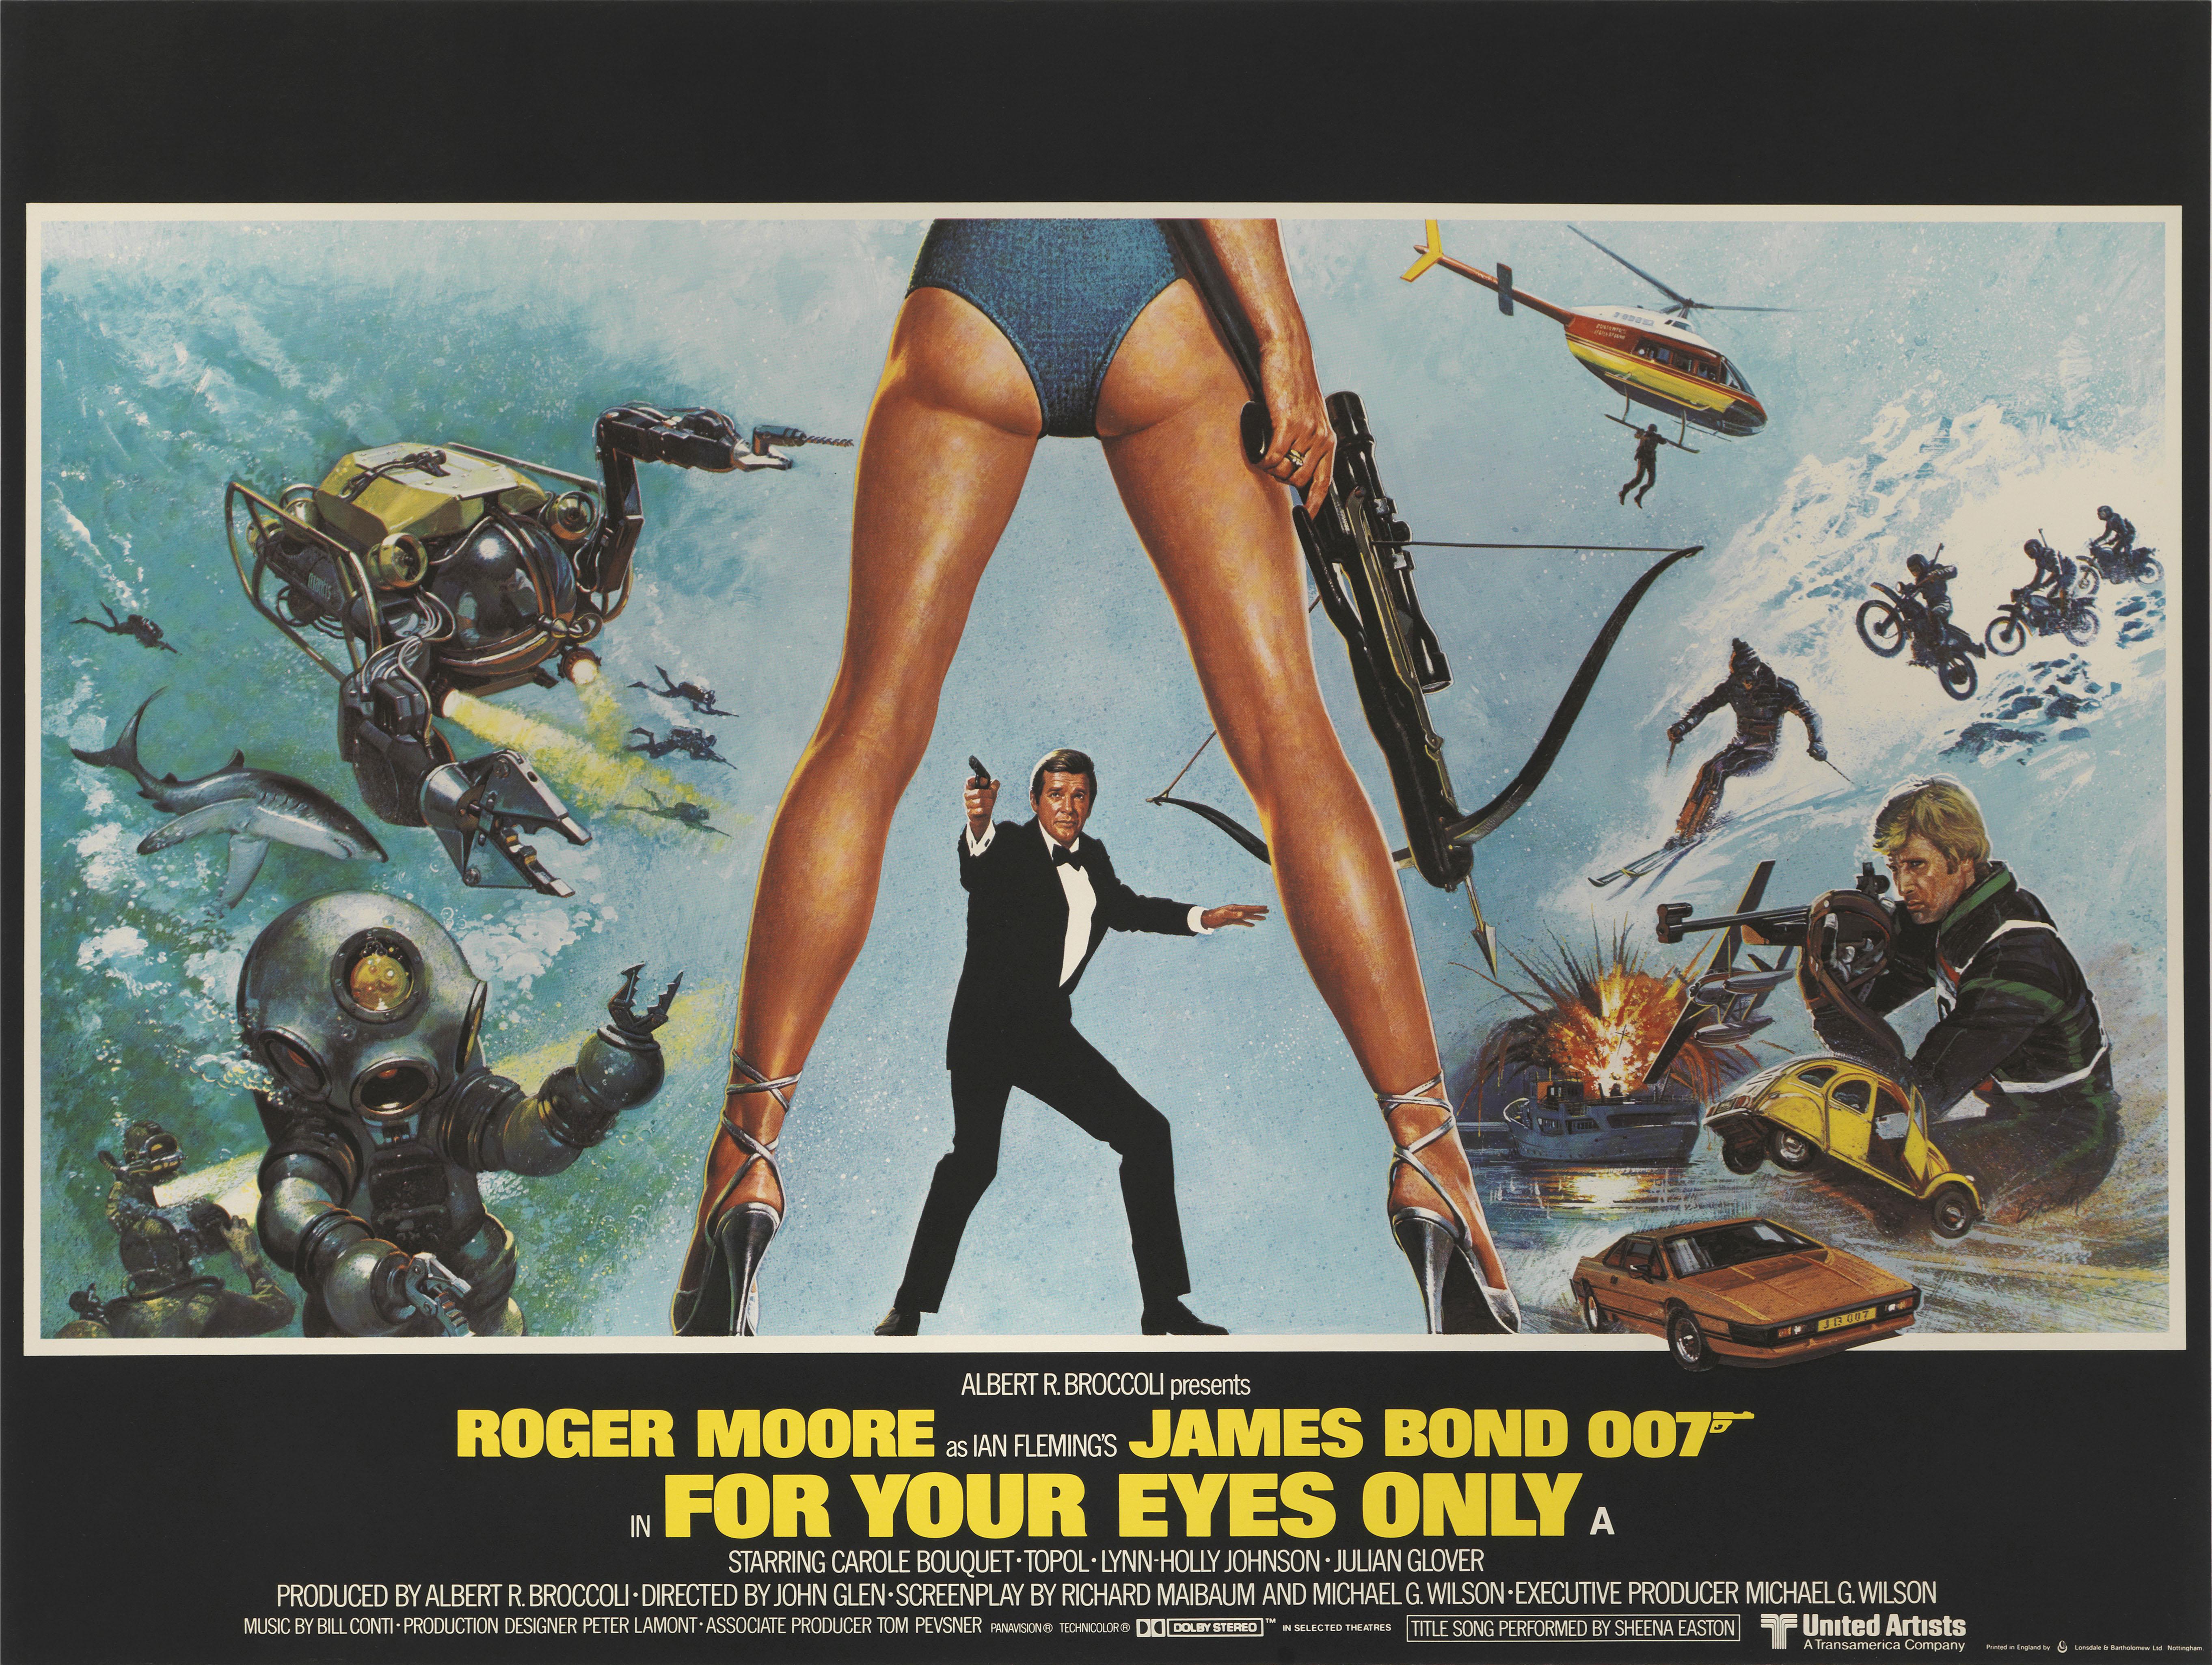 Original British film poster for the 1981 James Bond film For Your Eyes Only.
This was the twelfth in the James Bond series produced by Eon Productions, and the fifth to star Roger Moore as James Bond. The film marked John Glen's directorial film